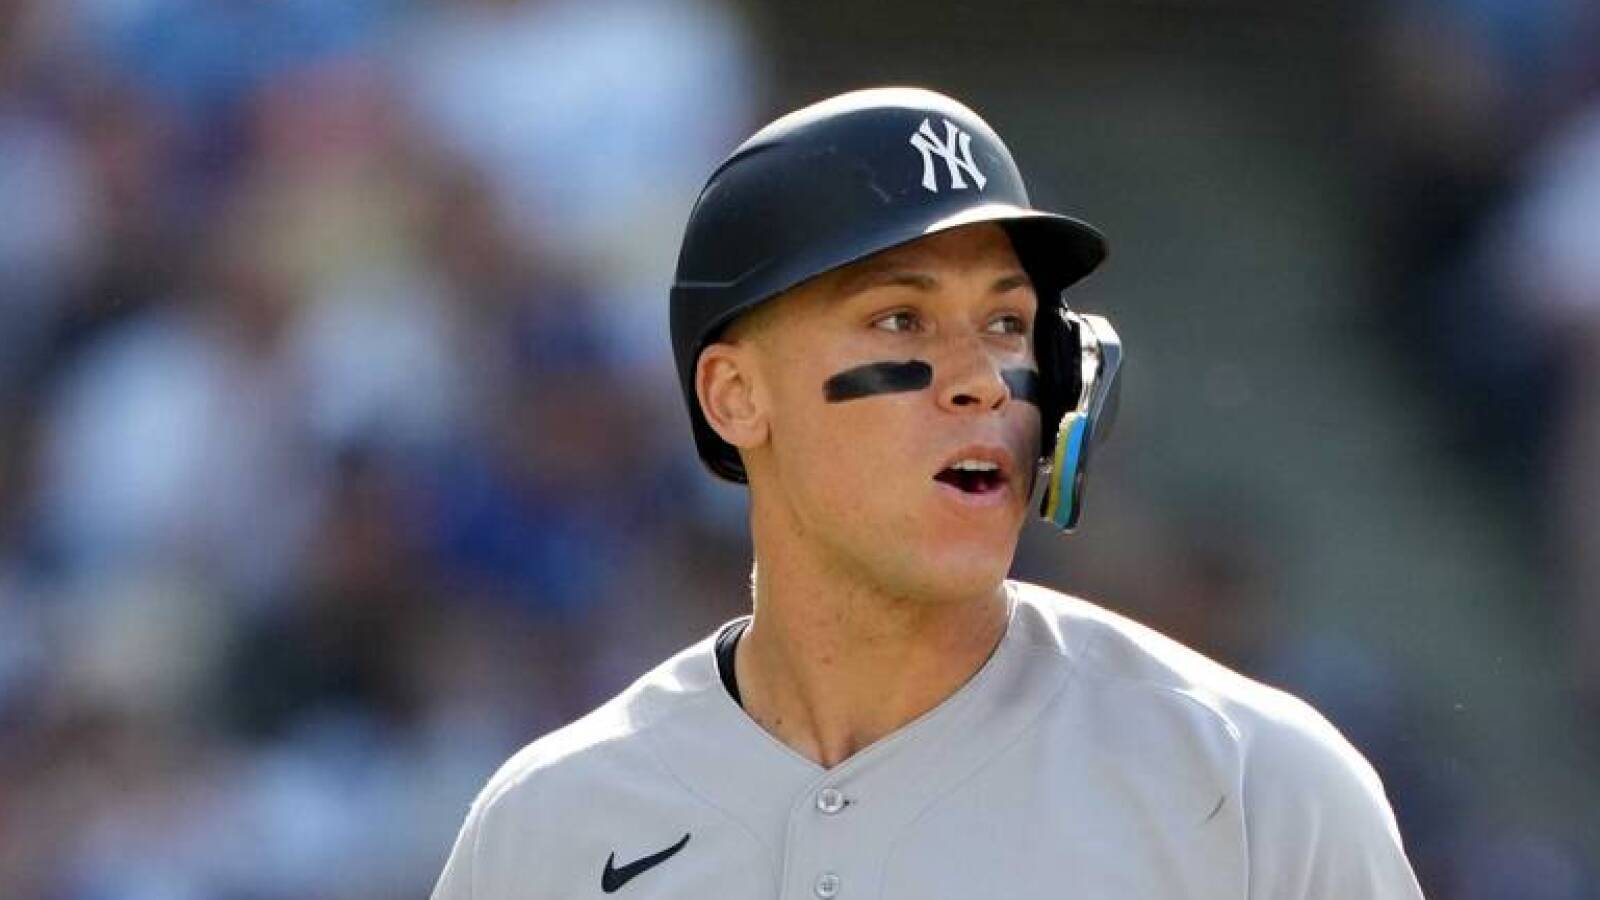 Yankees' Aaron Judge noncommittal about return from injury